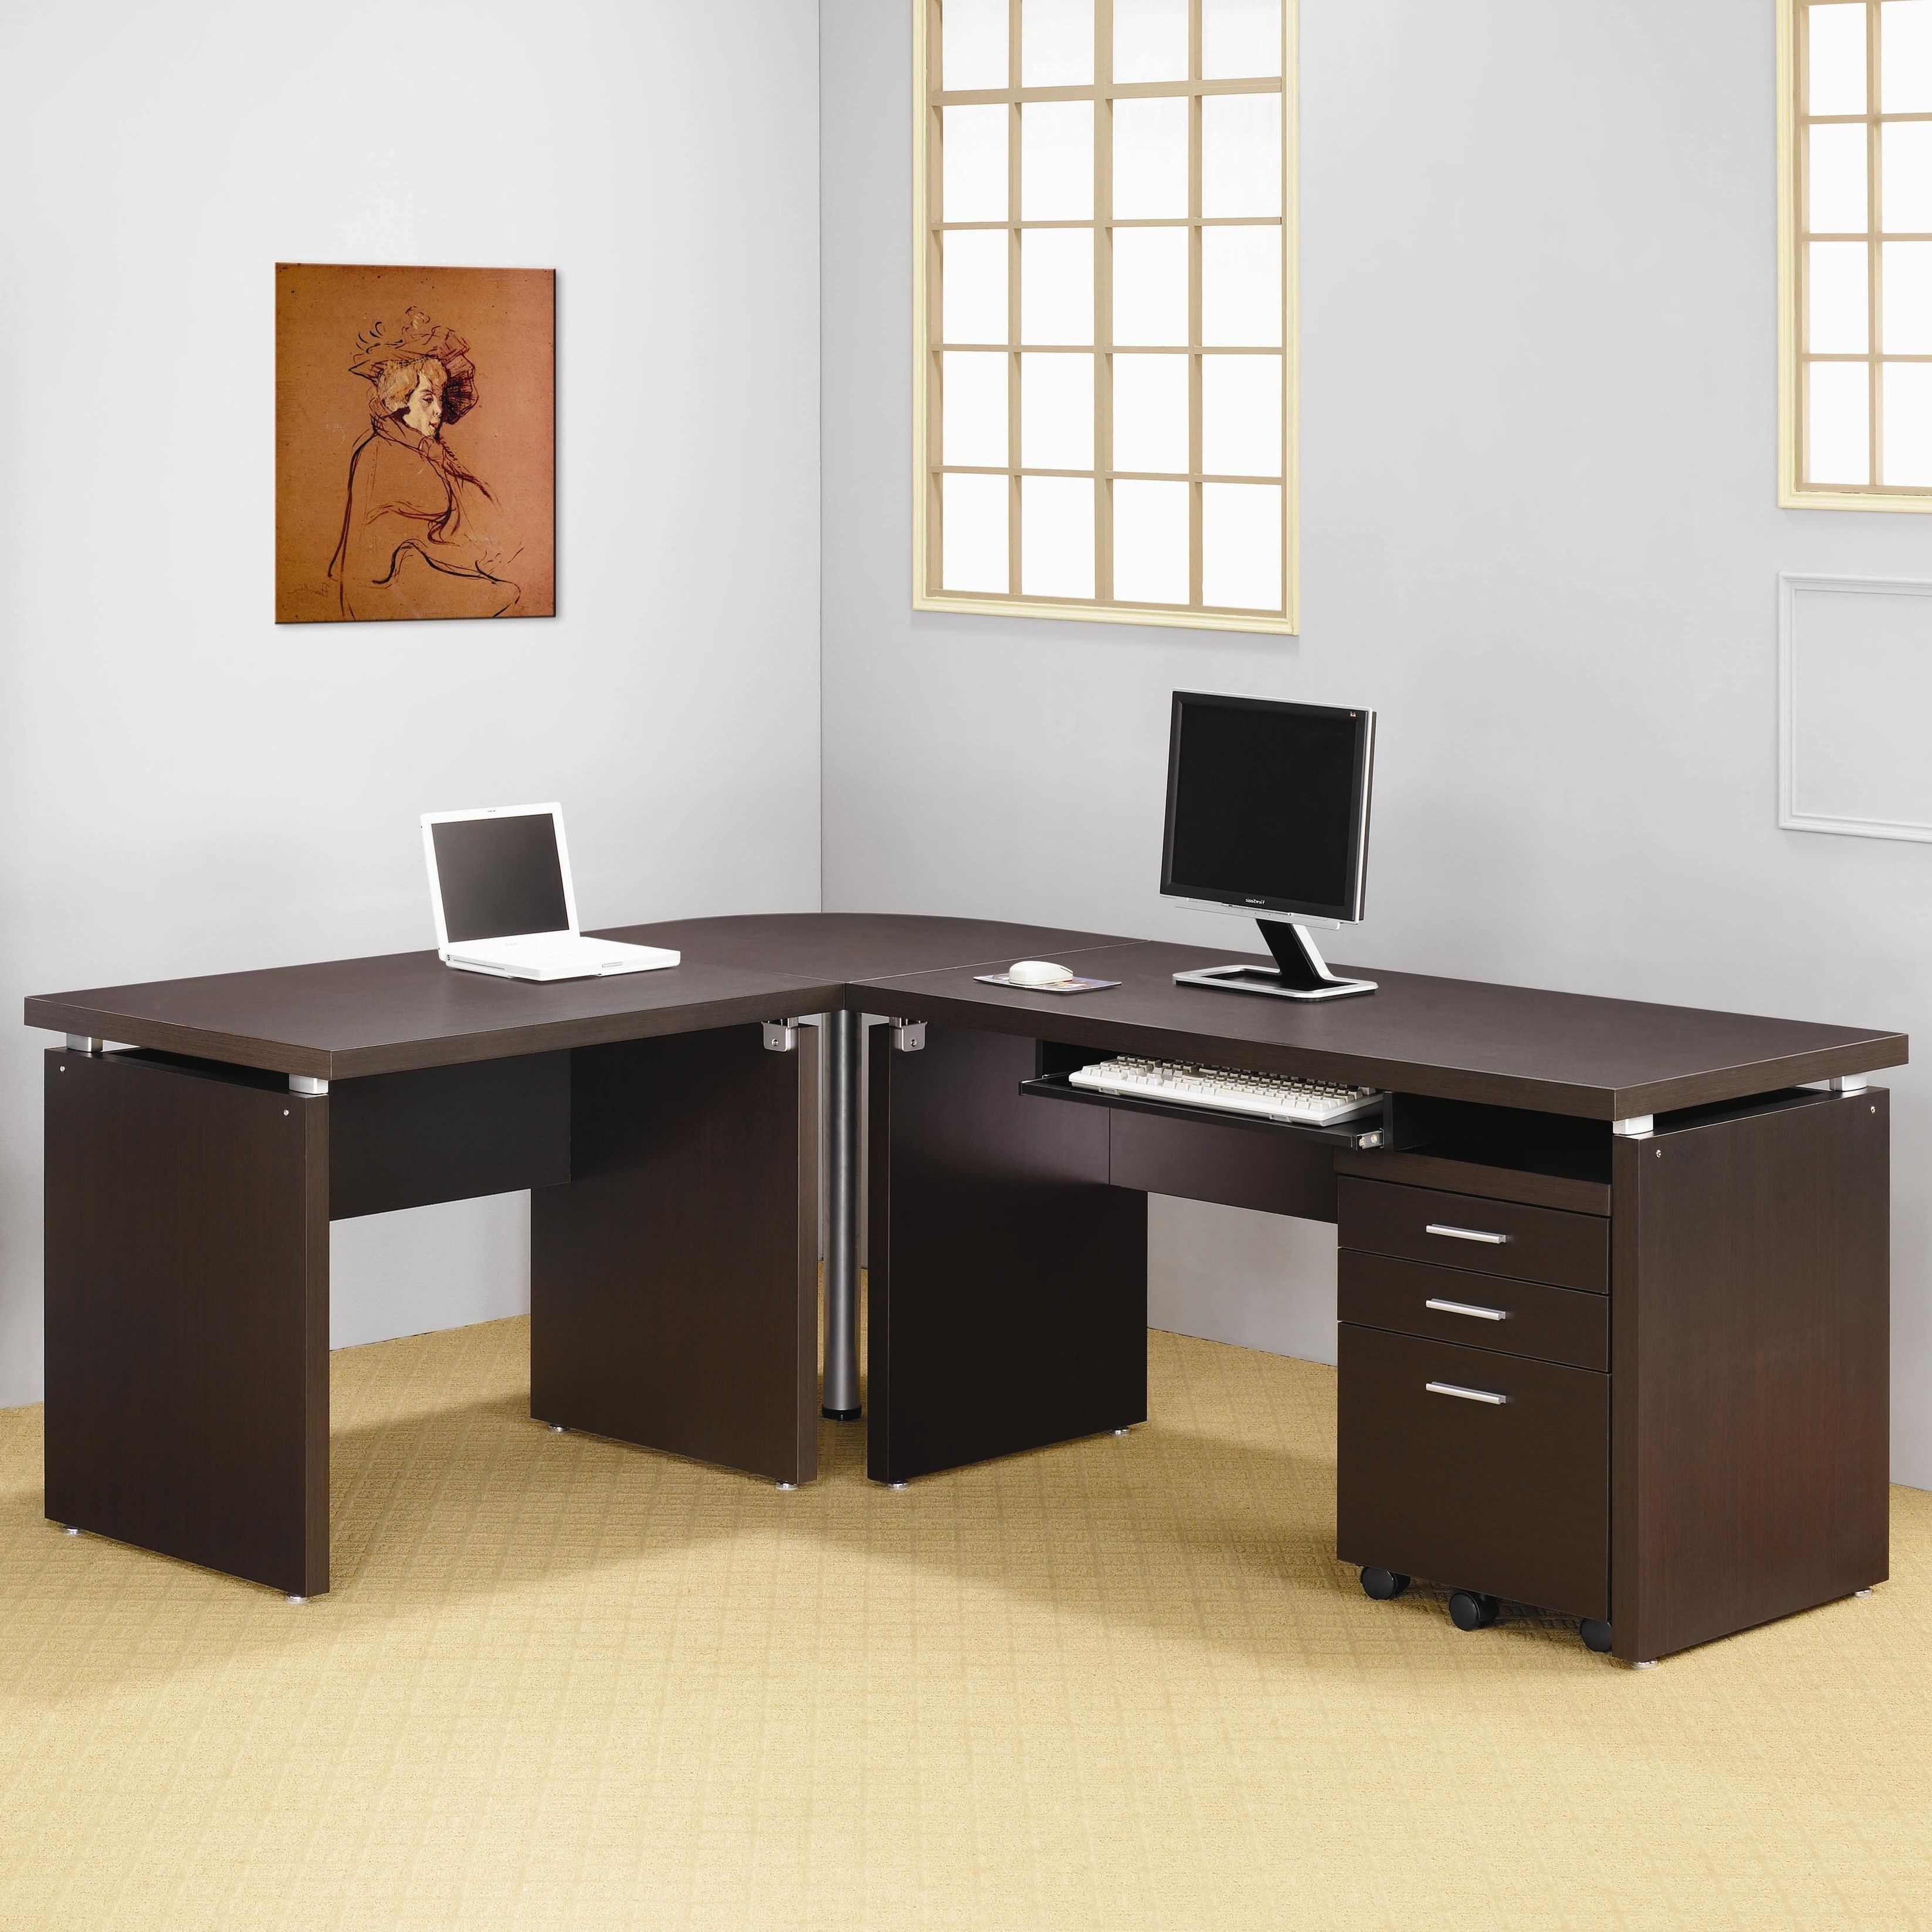 Most Recent Long Computer Desks Intended For Minimalist Computer Desk – Computer Desk With Hutch, Computer Desk (View 16 of 20)